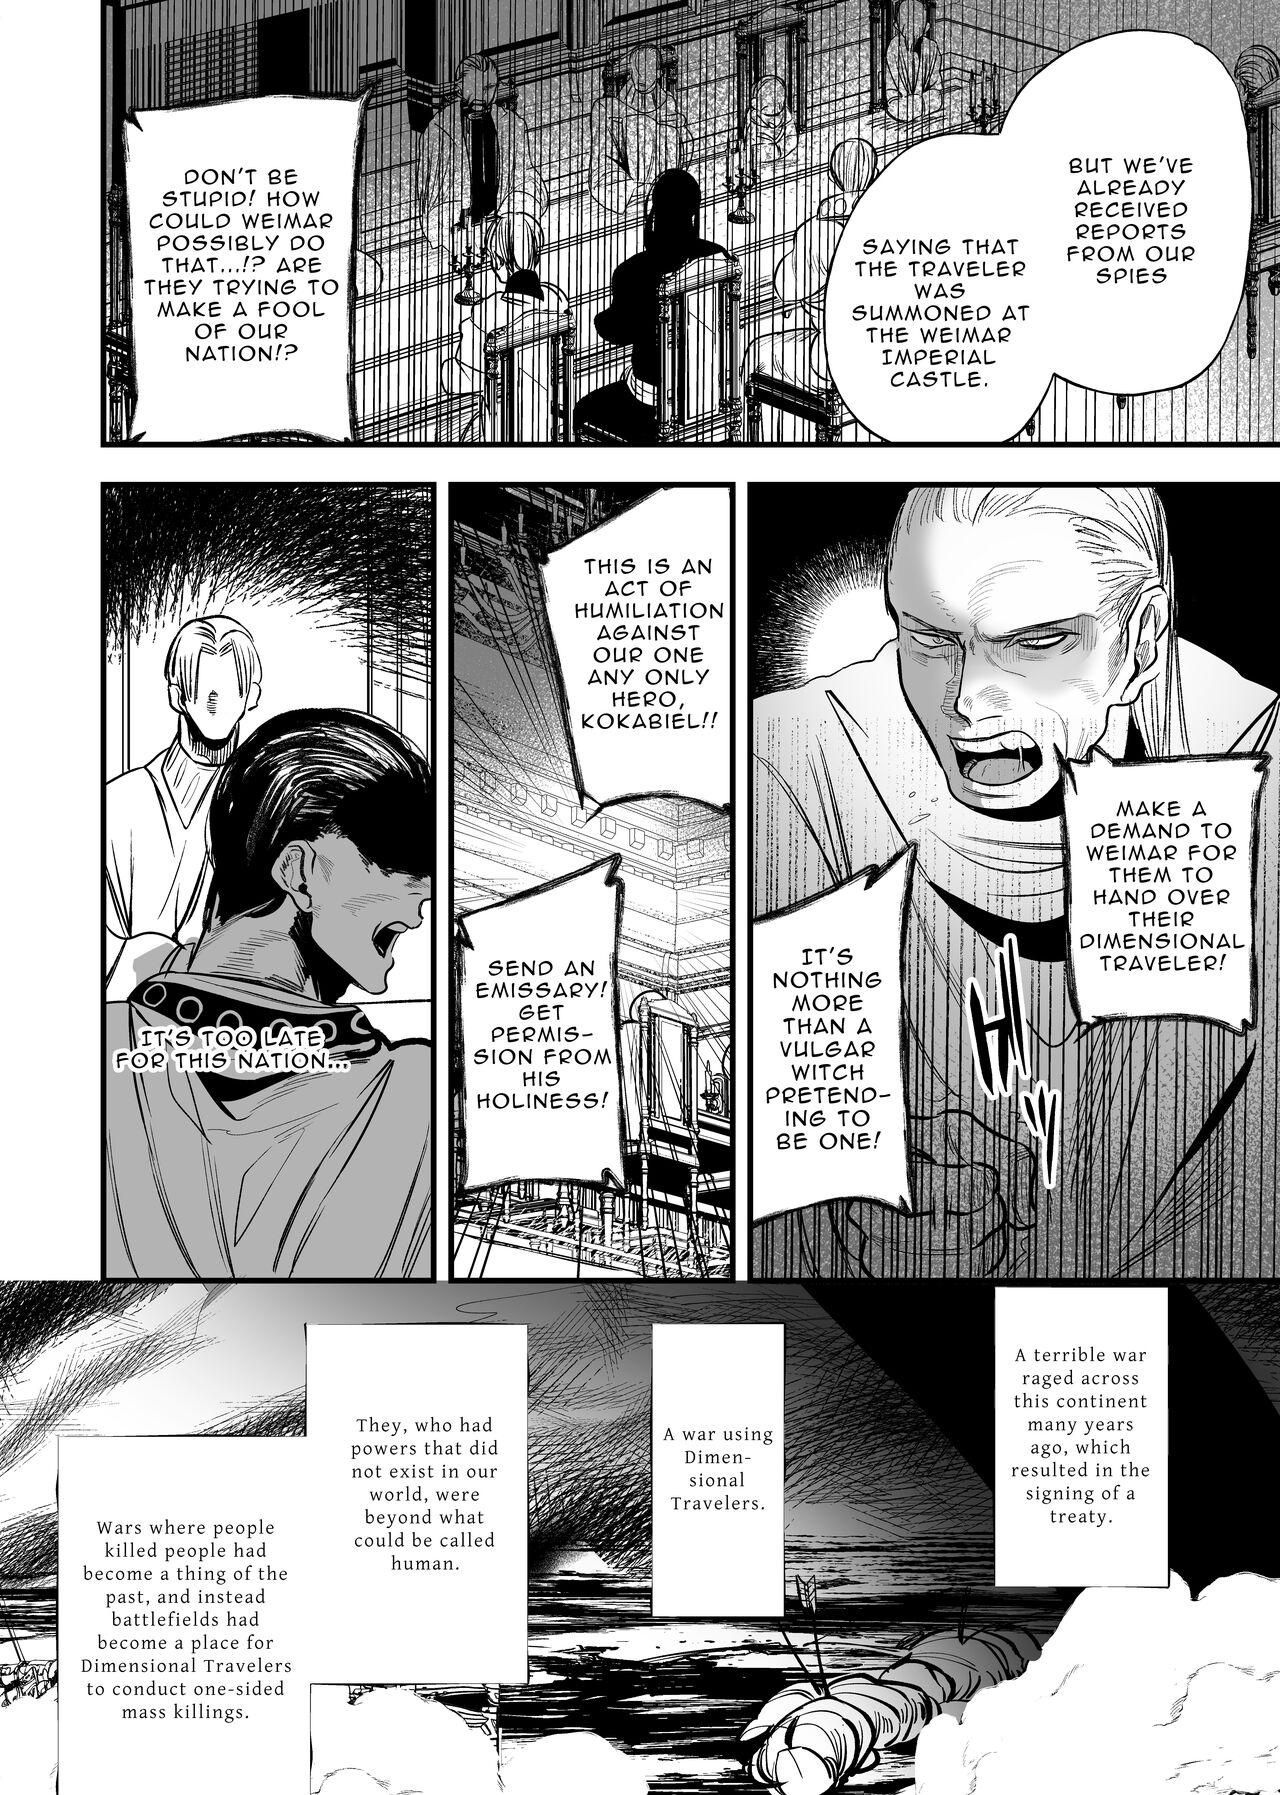 Lesbiansex The Man Who Saved Me on my Isekai Trip was a Killer... 2 - Original This - Page 6